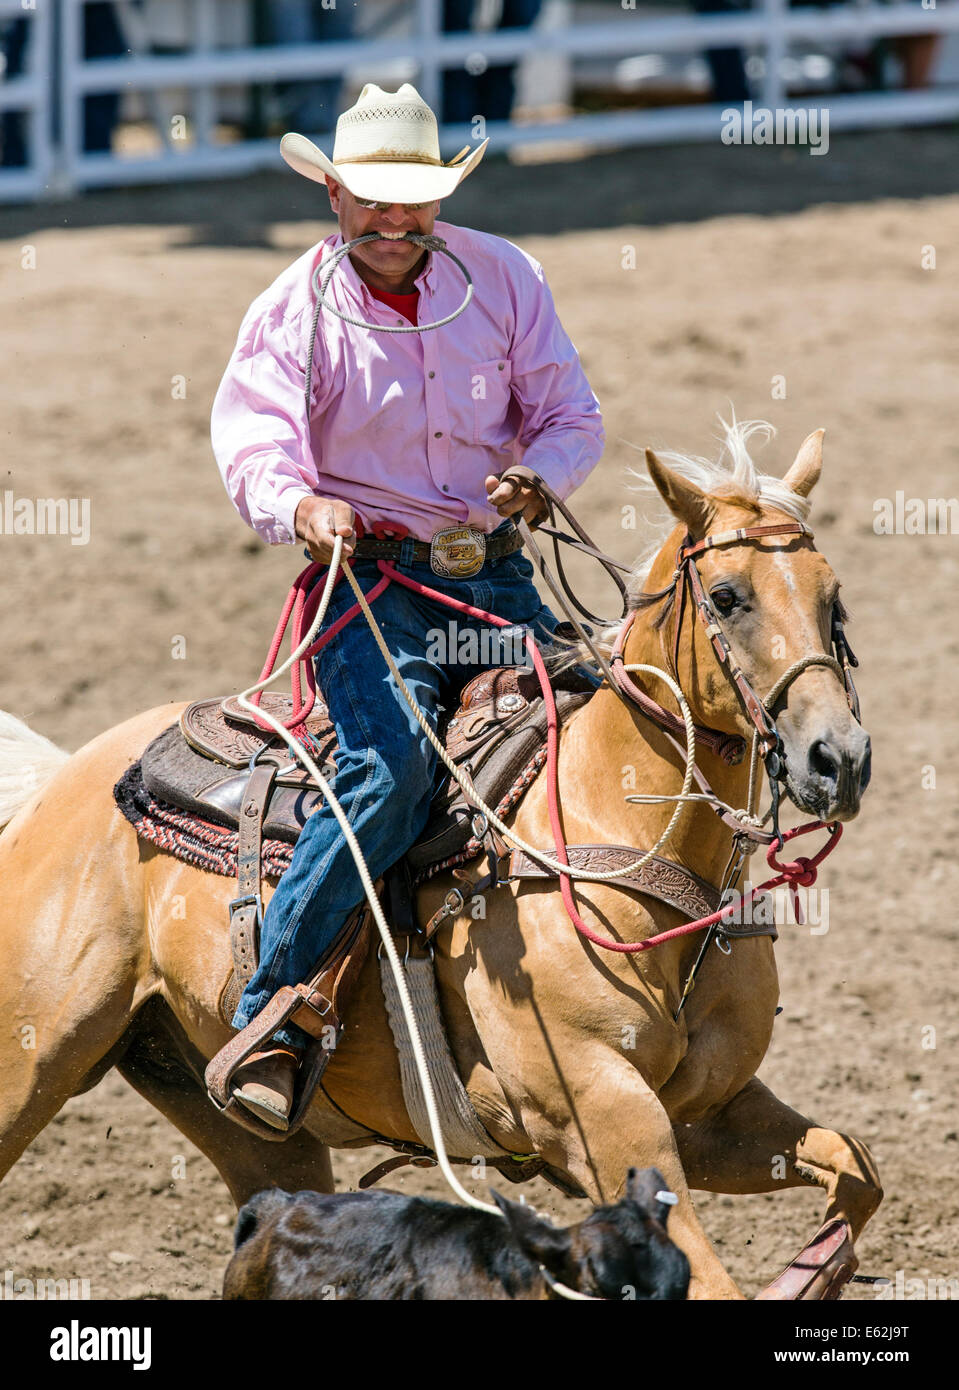 Cowboy on horseback competes in the tie-down roping event, Chaffee County Fair & Rodeo Stock Photo